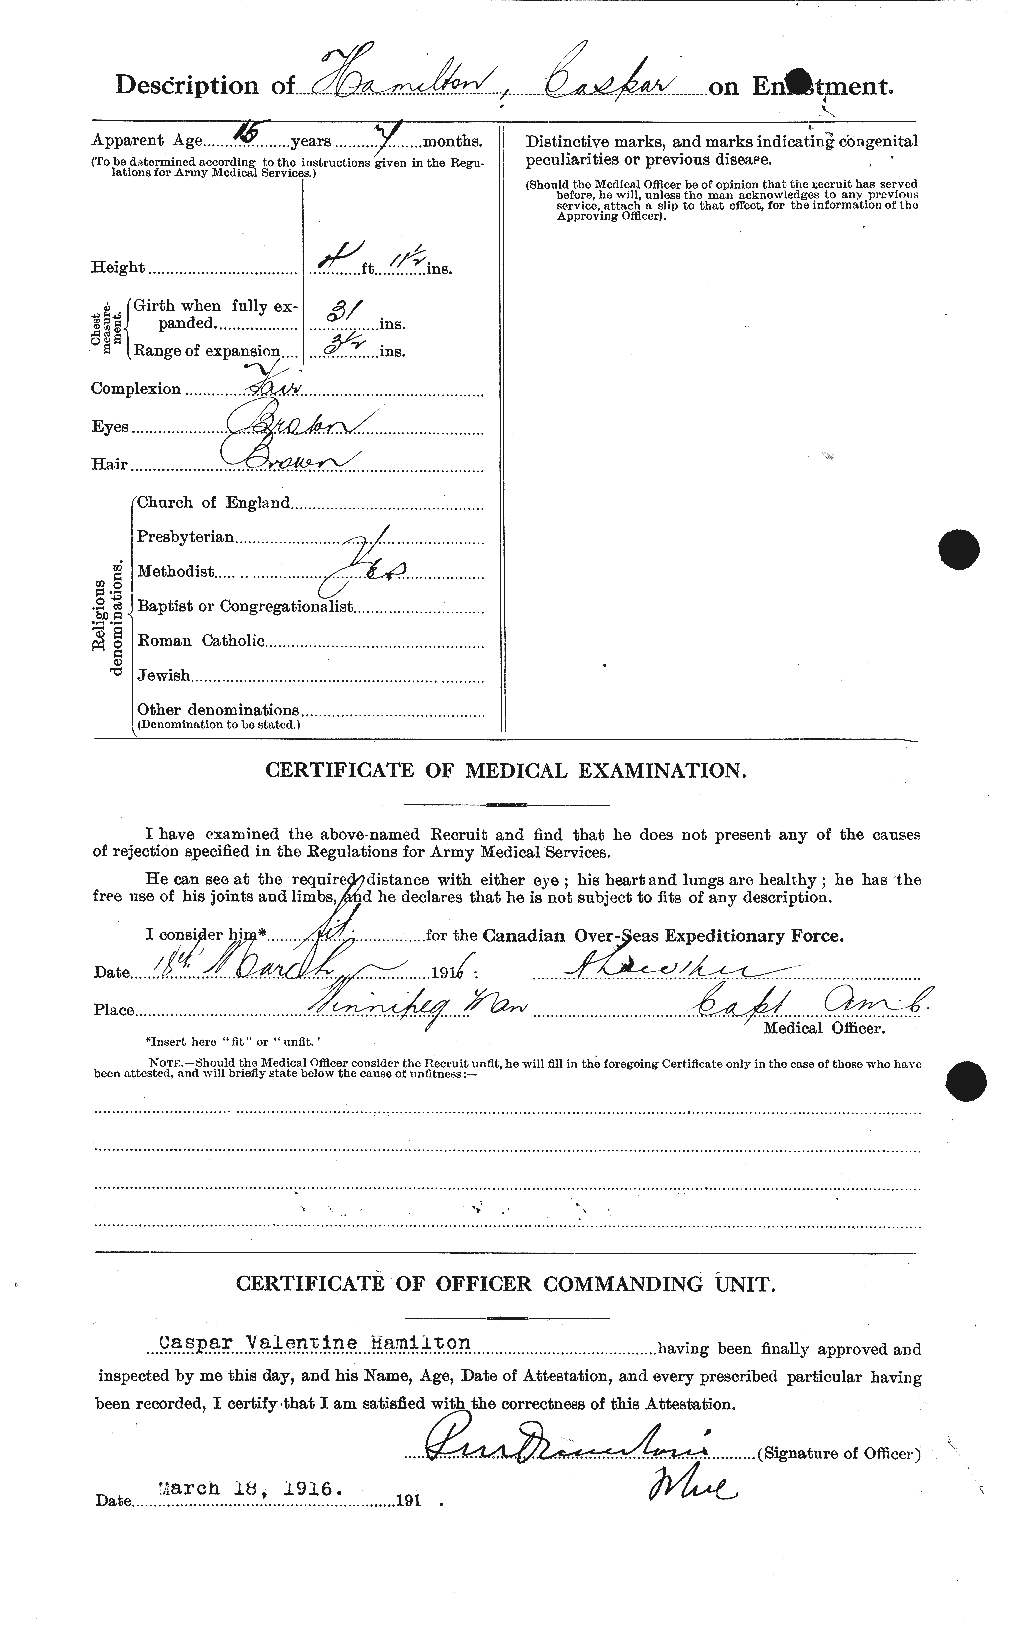 Personnel Records of the First World War - CEF 375284b